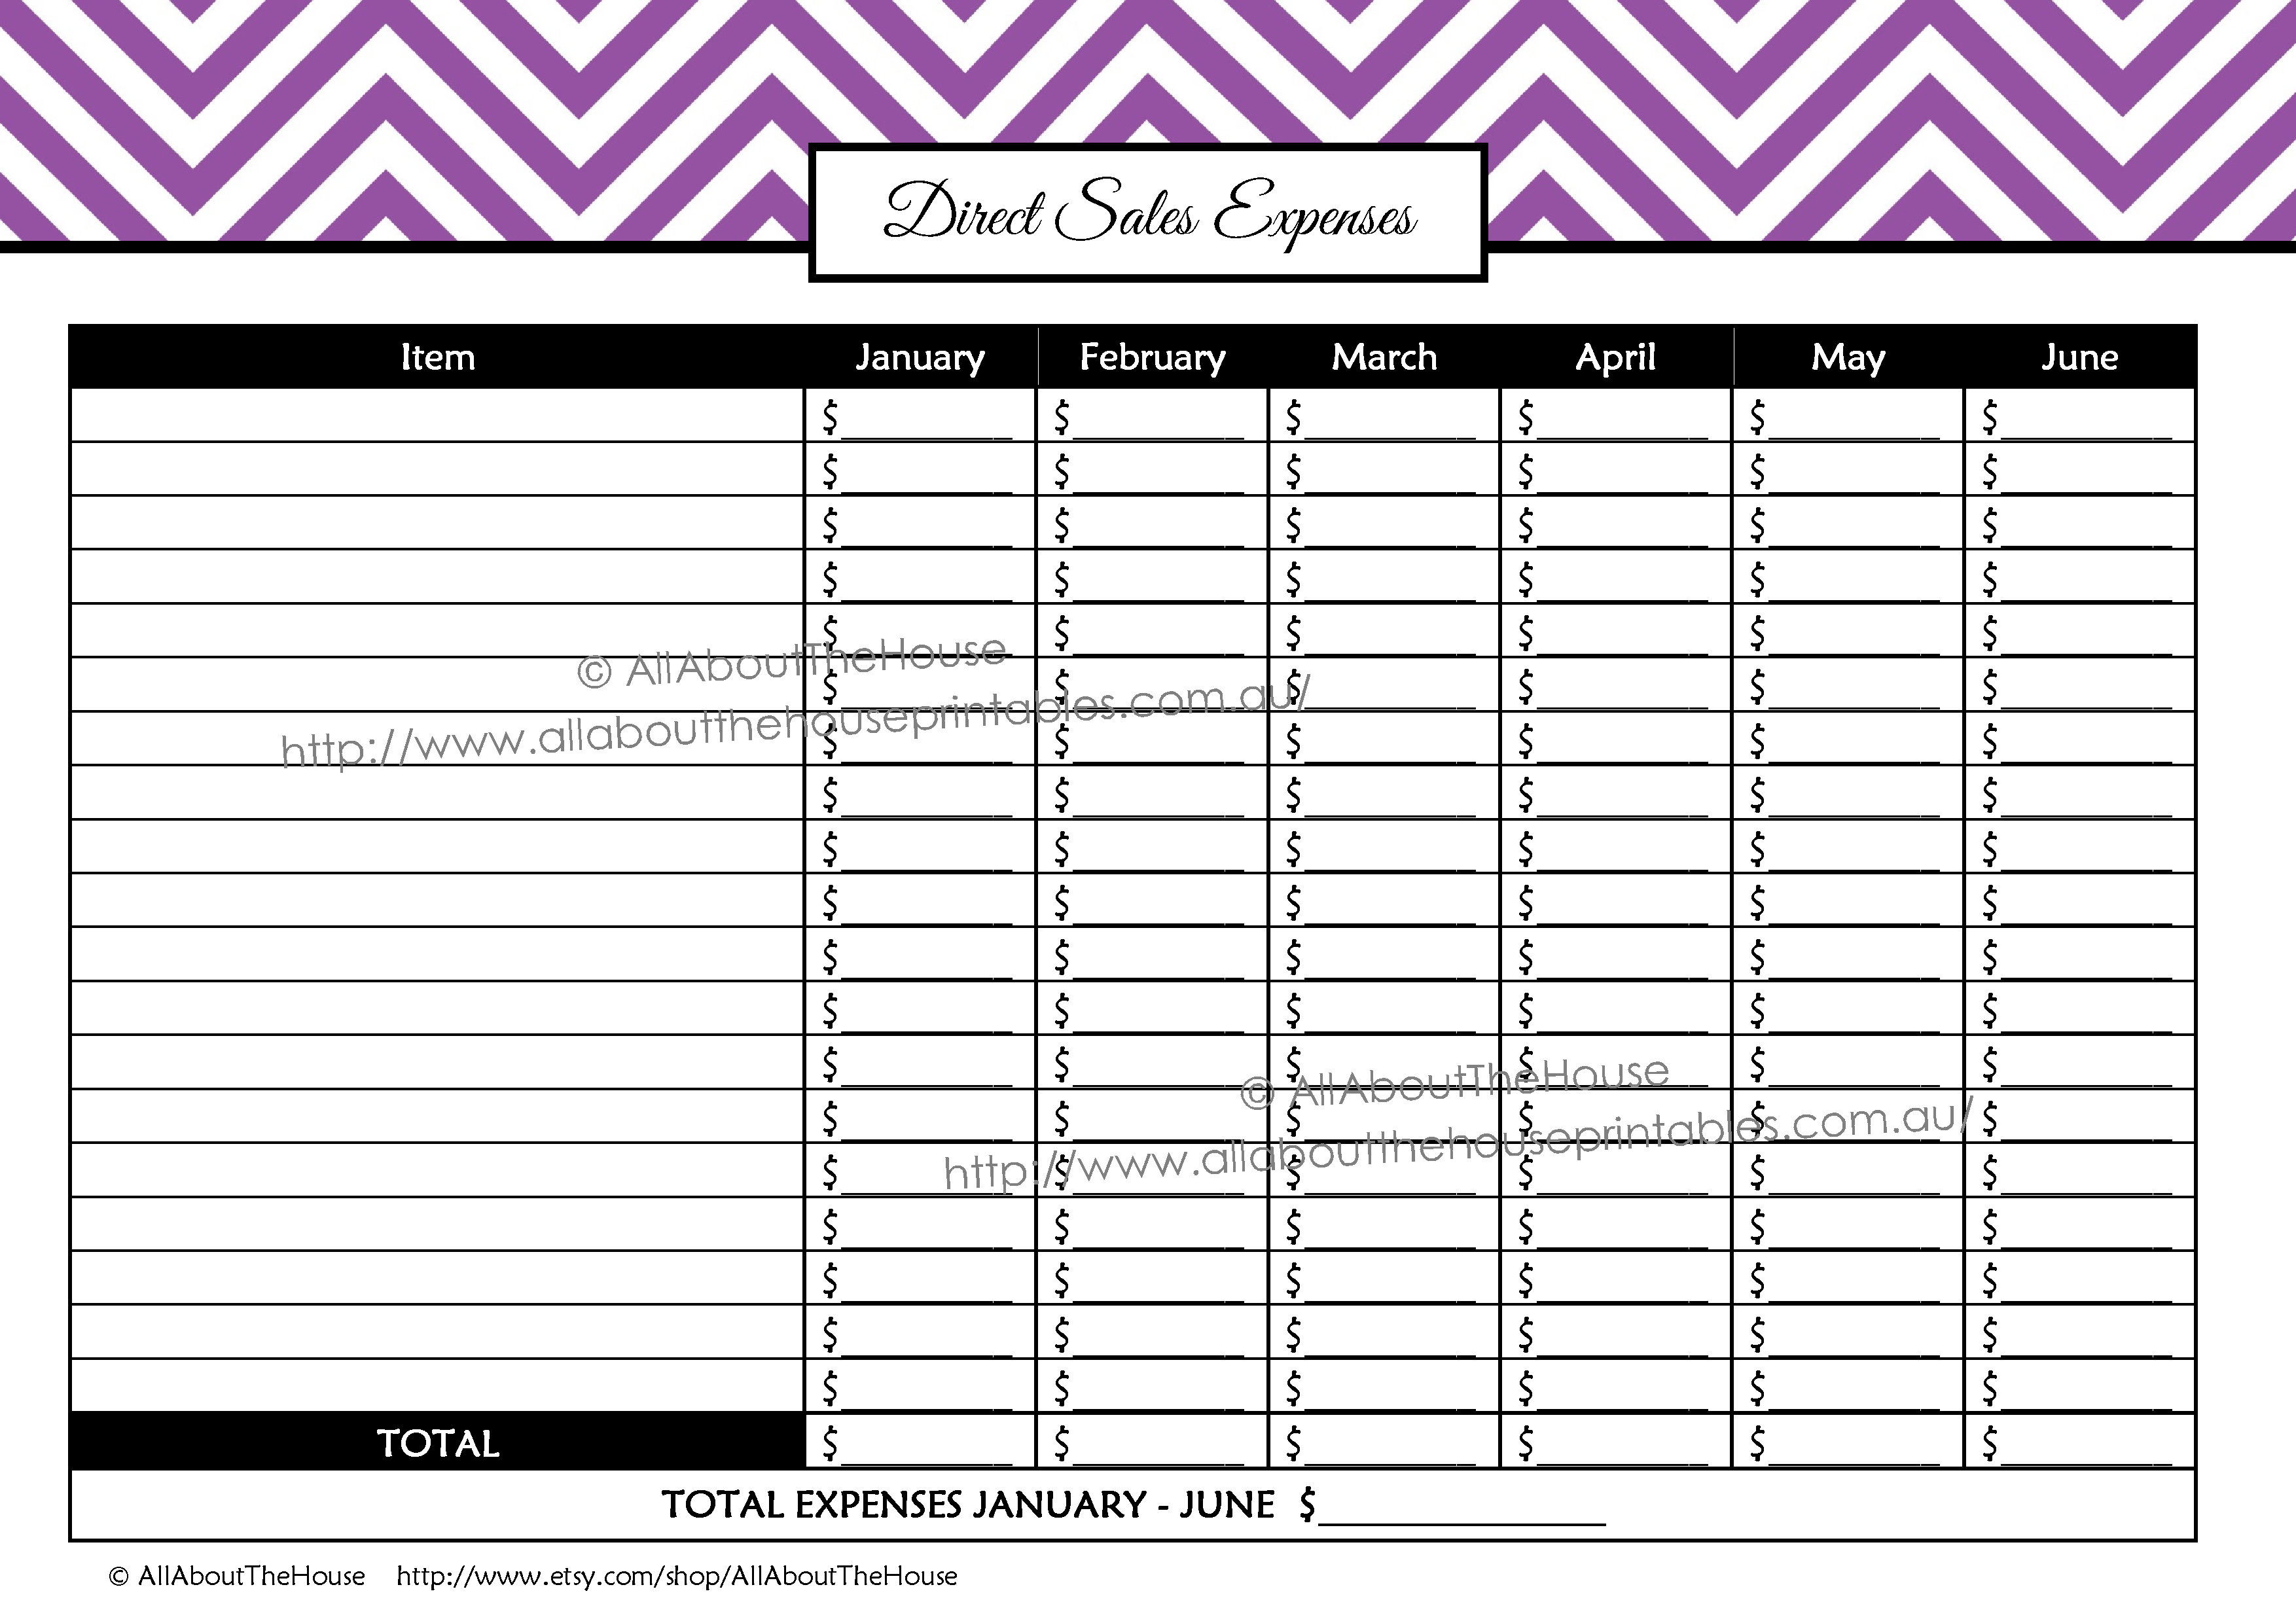 Origami Owl Order Form Form Allaboutthehouse Printables